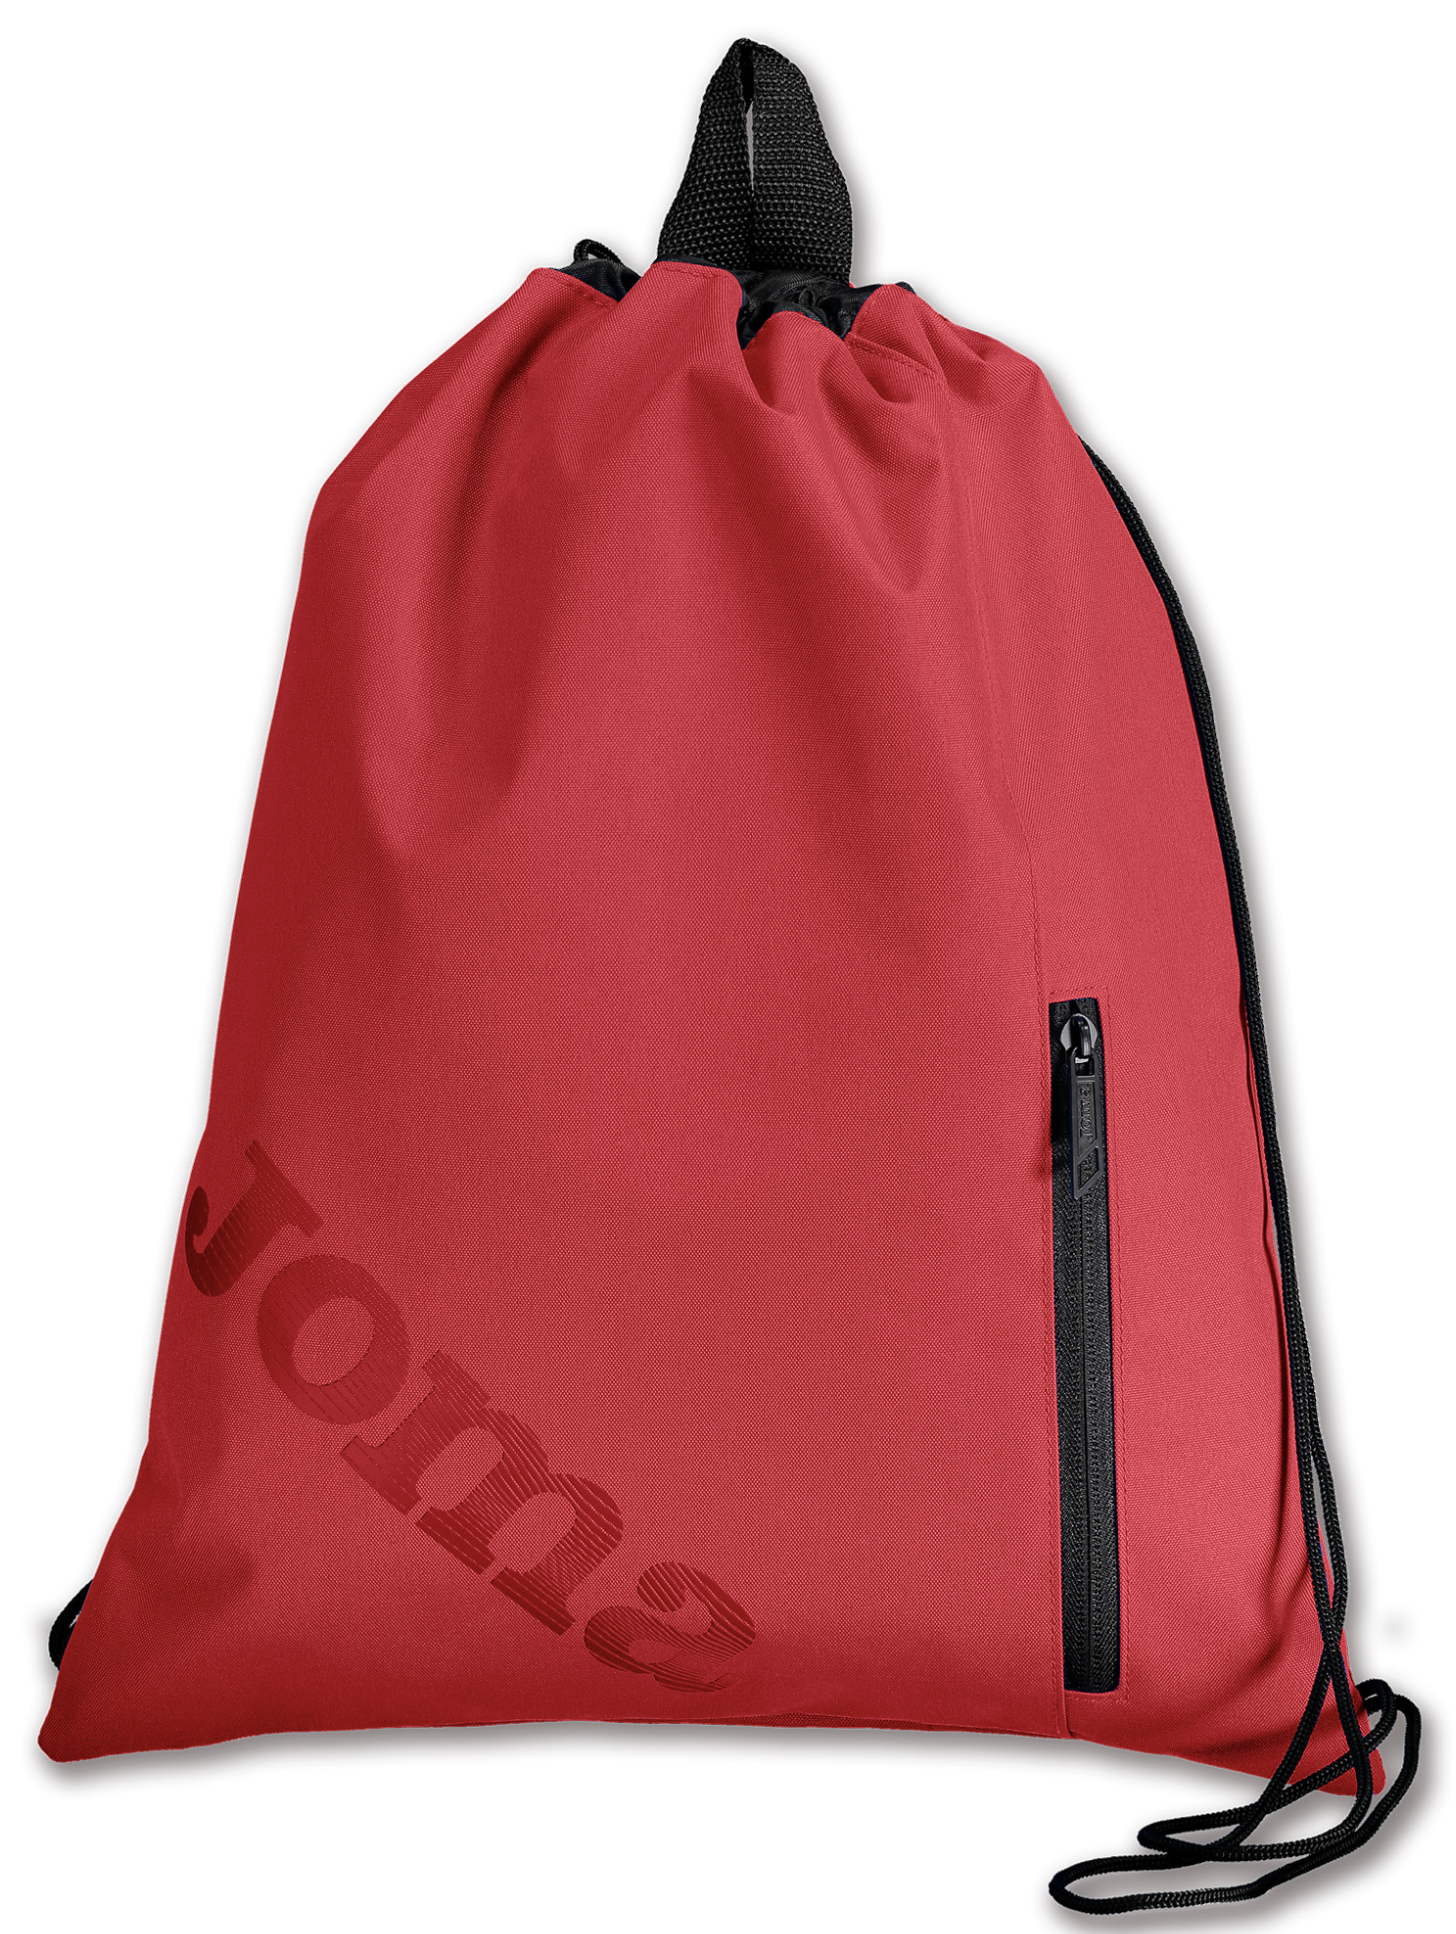 Joma Sackpack-Red